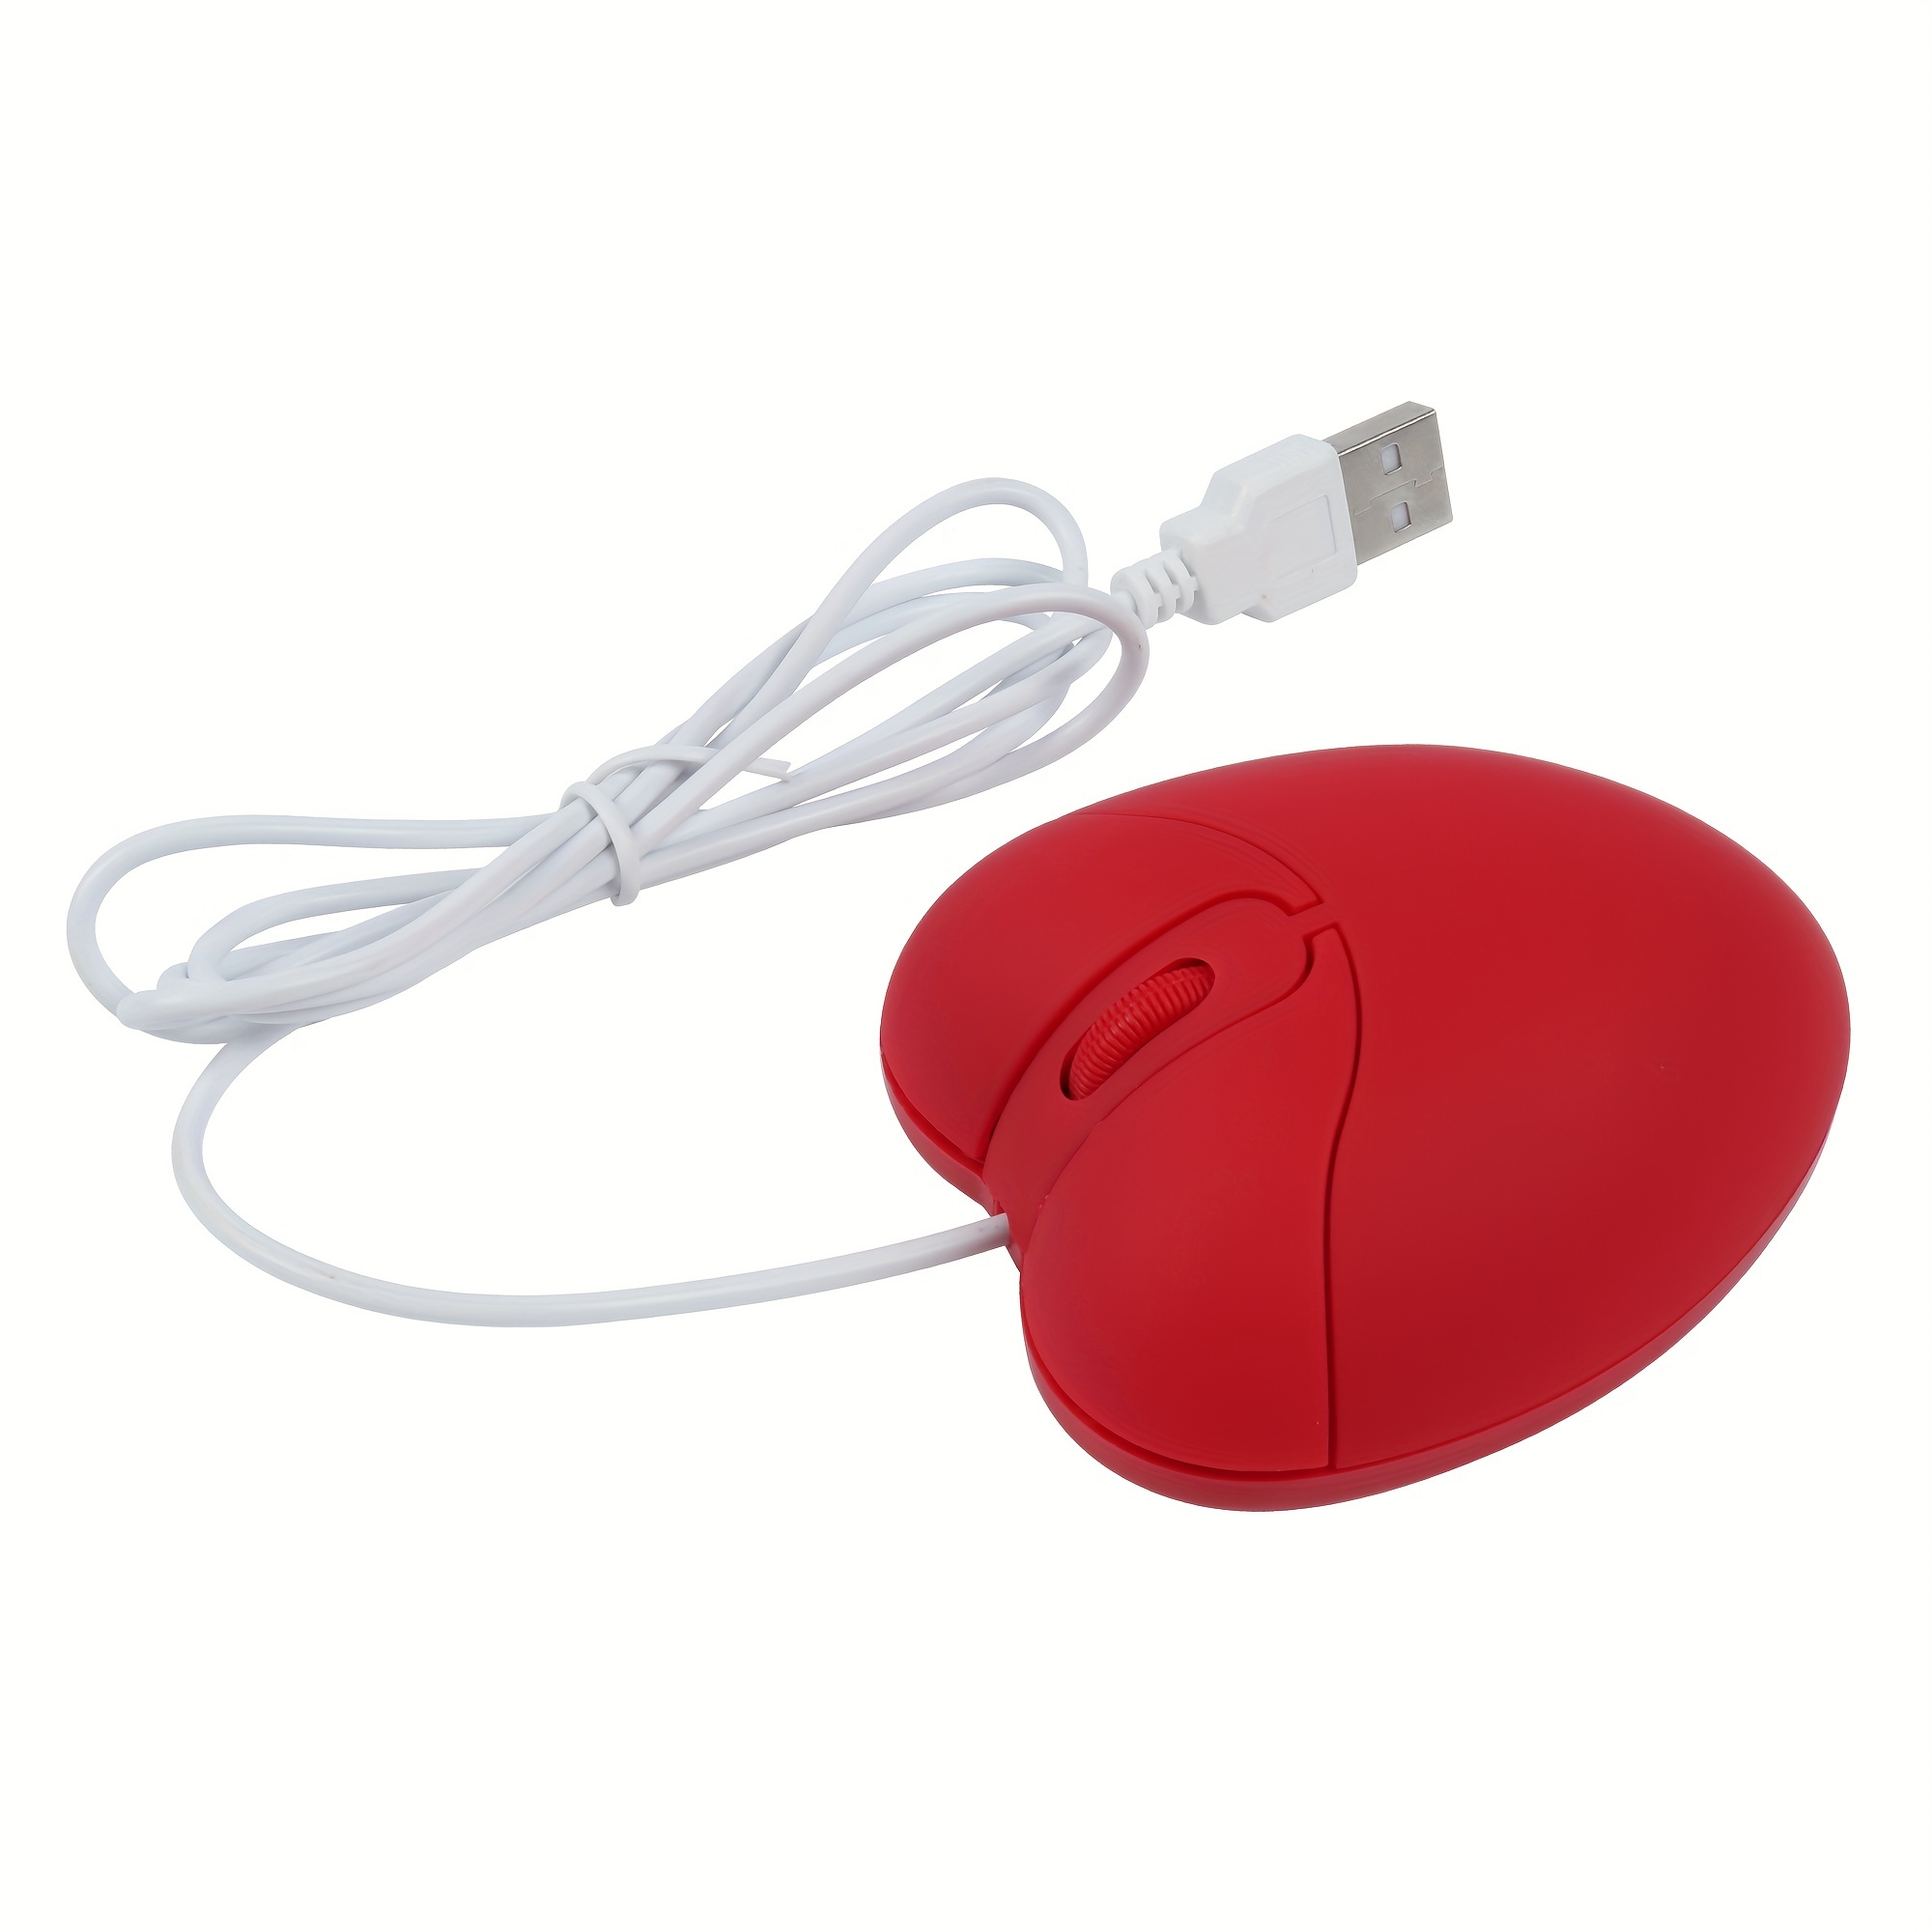 red computer mouse png